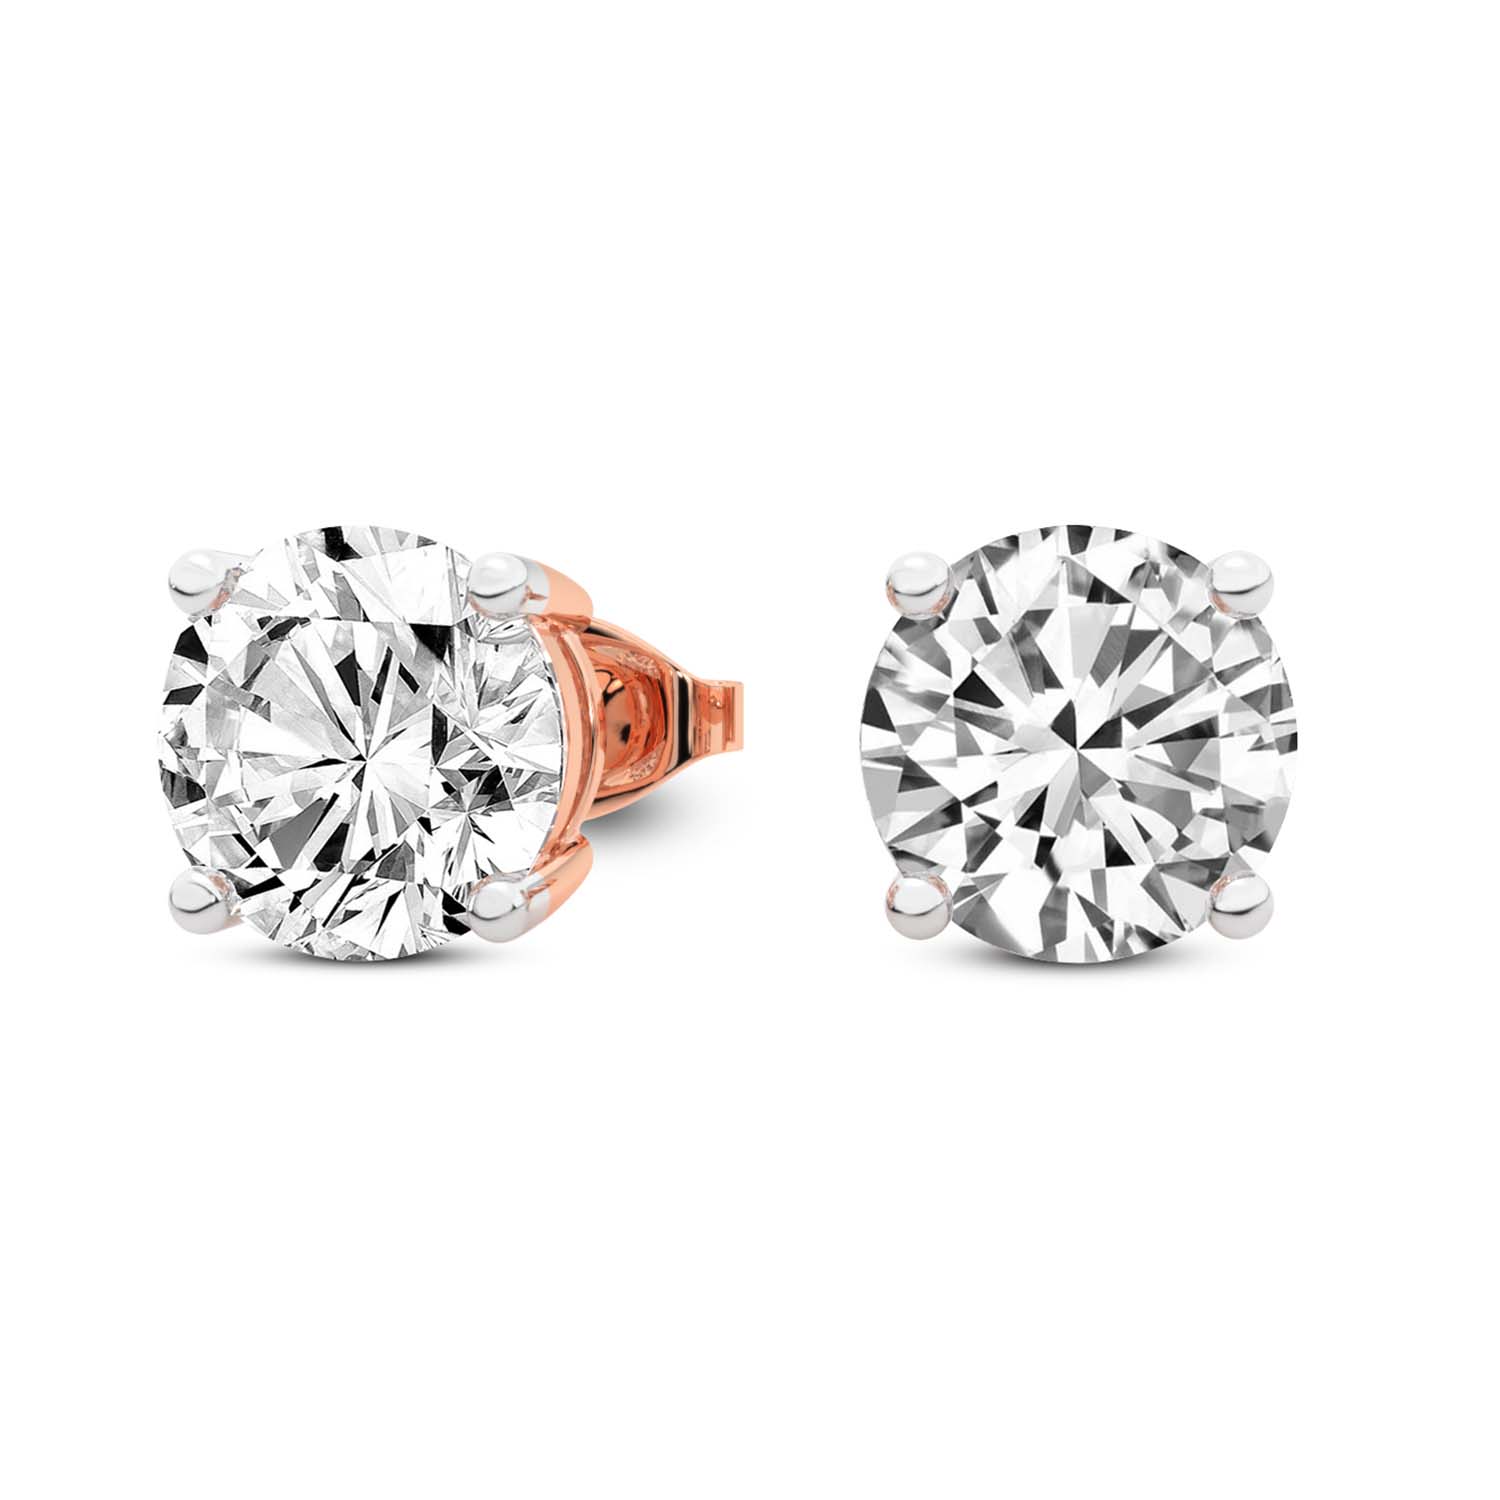 4 Prong Round Lab Diamond Stud Earrings rose gold earring, small right view